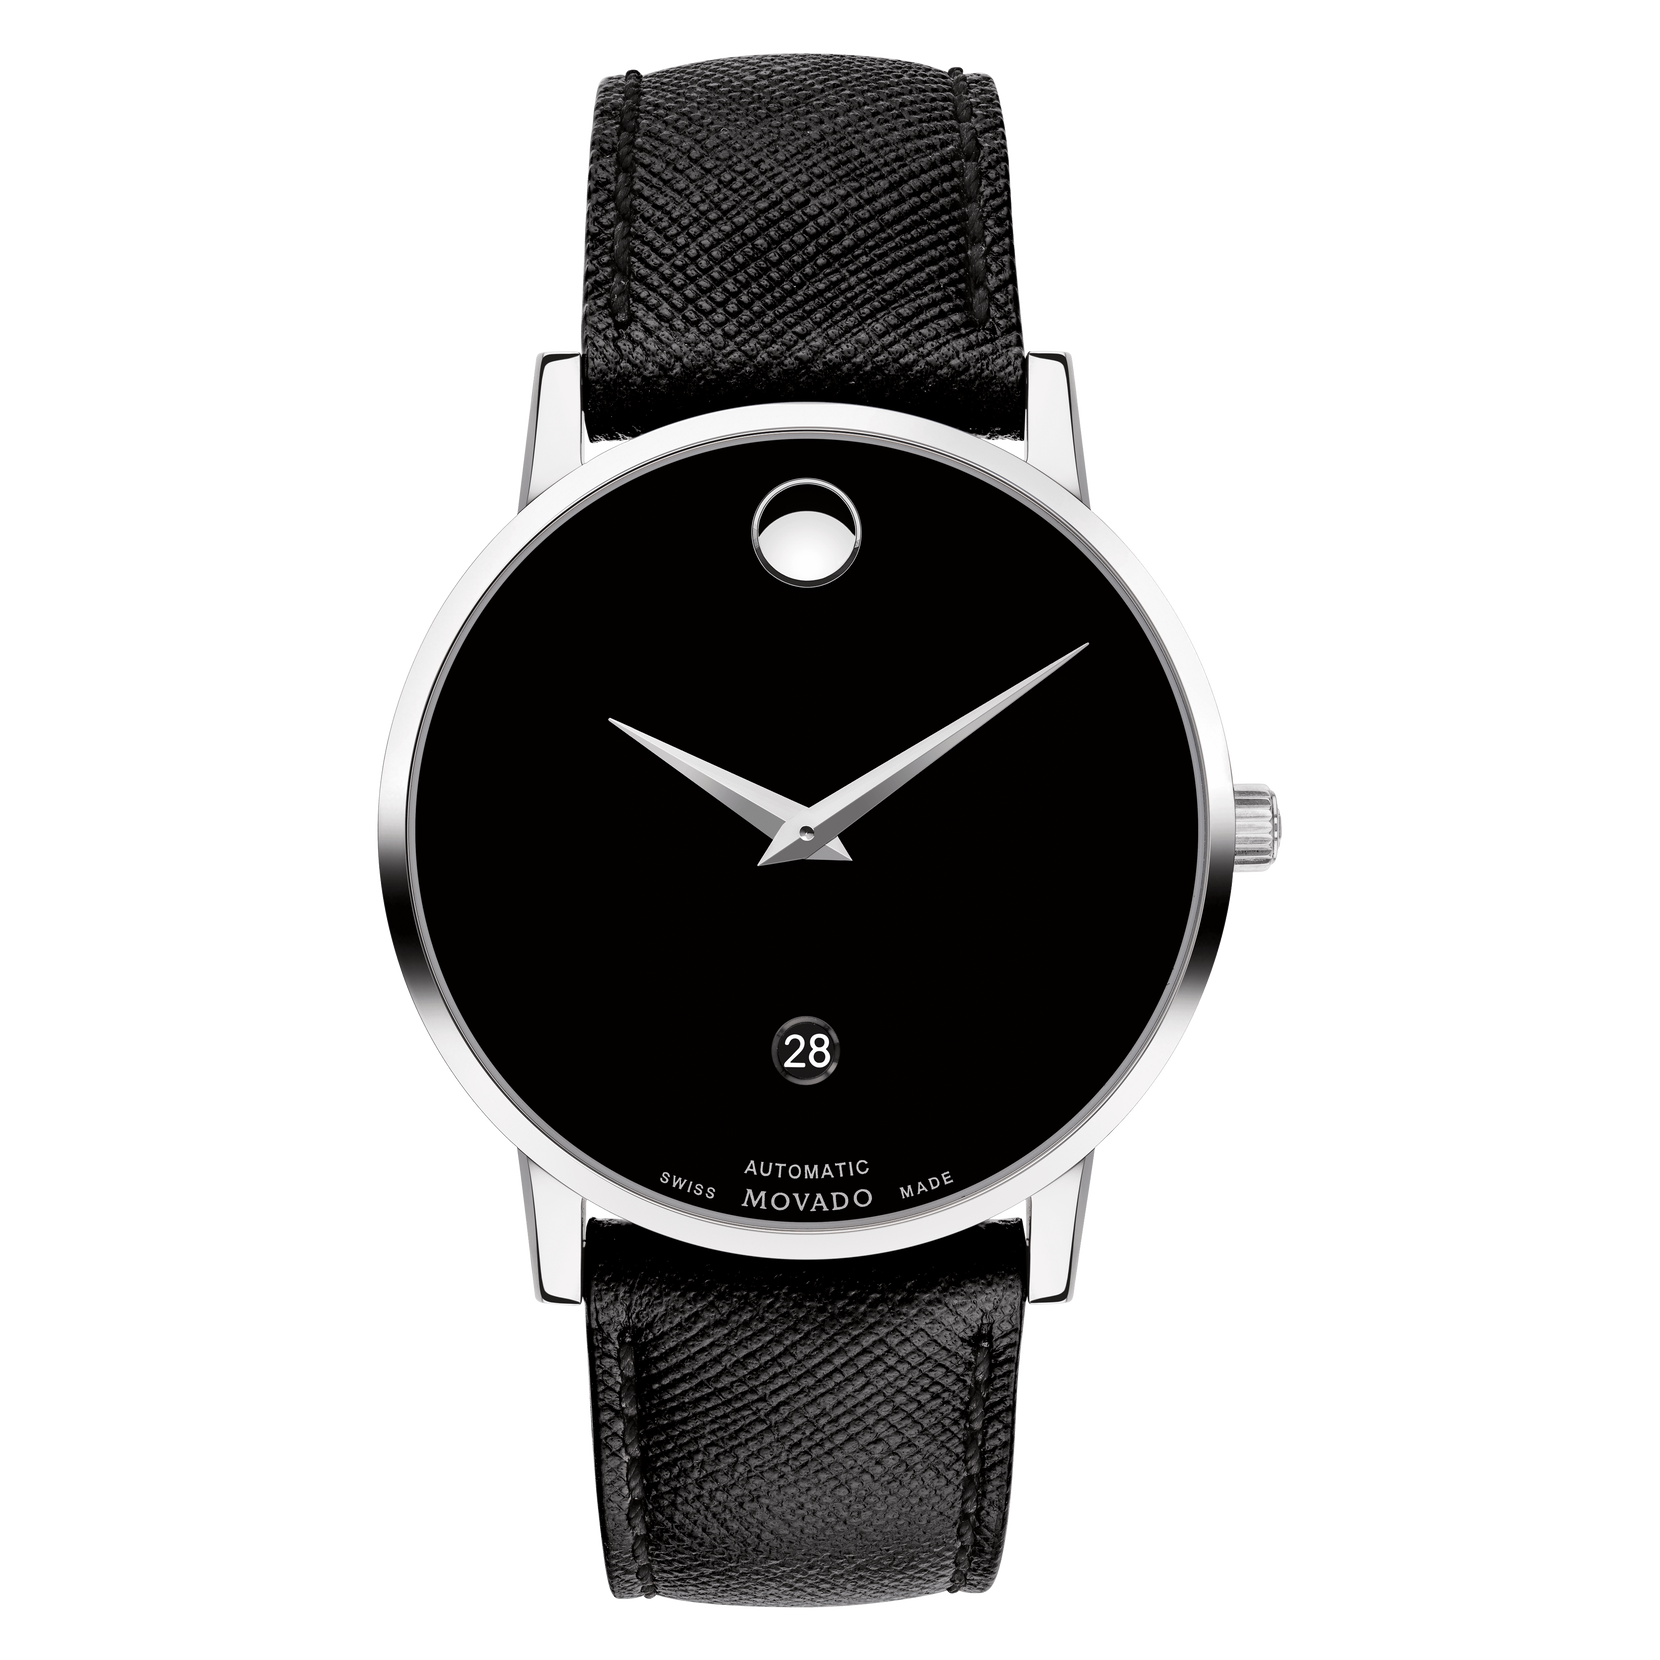 Watch | Strap Museum Movado Movado Classic Automatic Leather Black With Stainless Steel Case